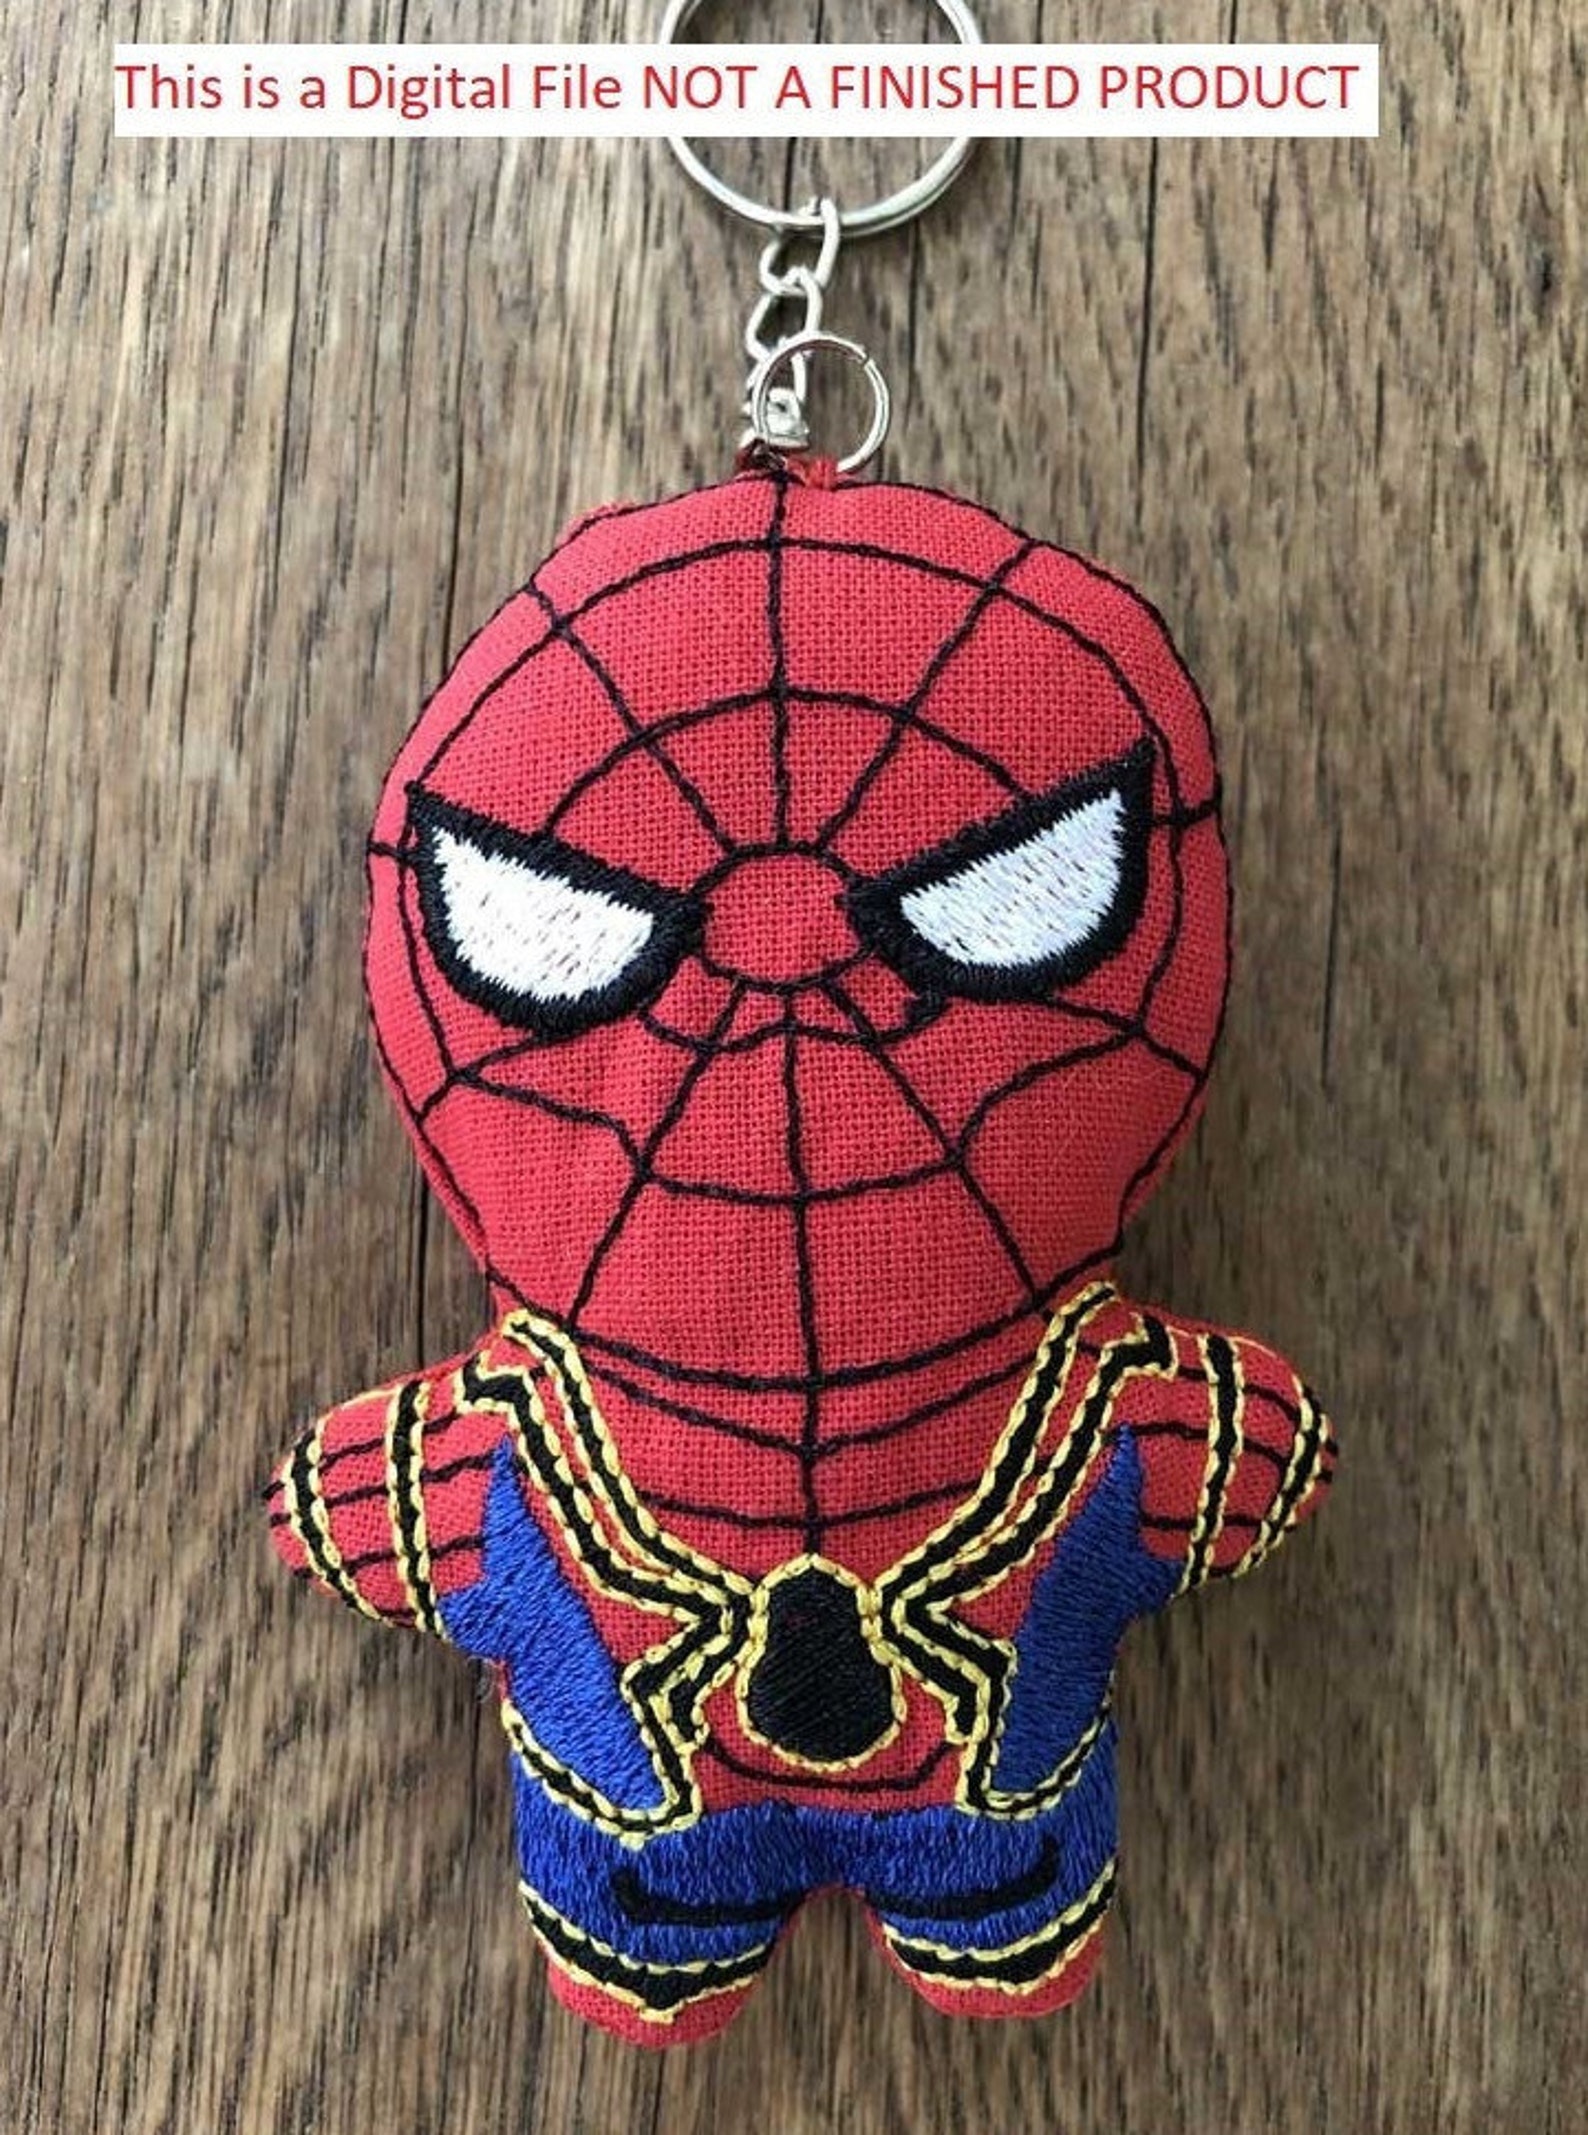 Spiderman stuffed ITH 4x4 Machine Embroidery Design - Etsy